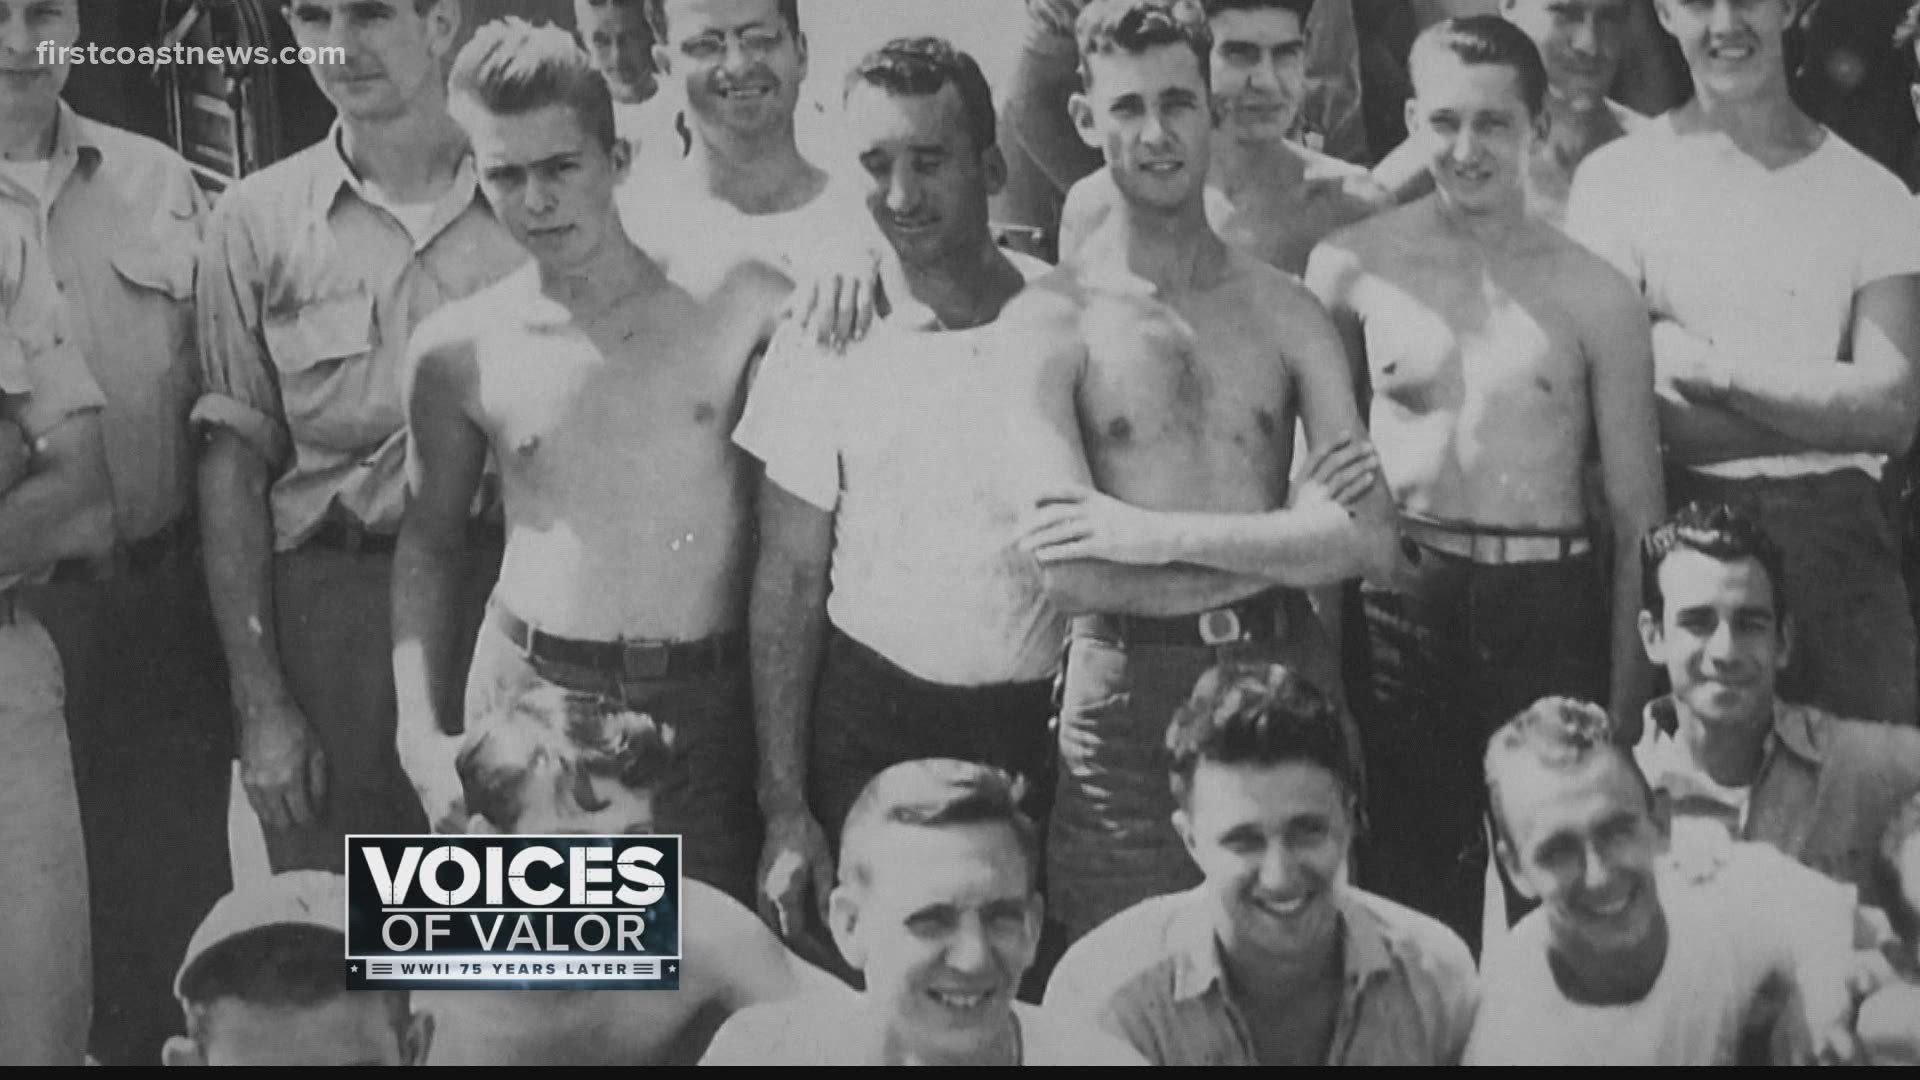 Local historian Frank Haggard shares fascinating local ties to WWII.